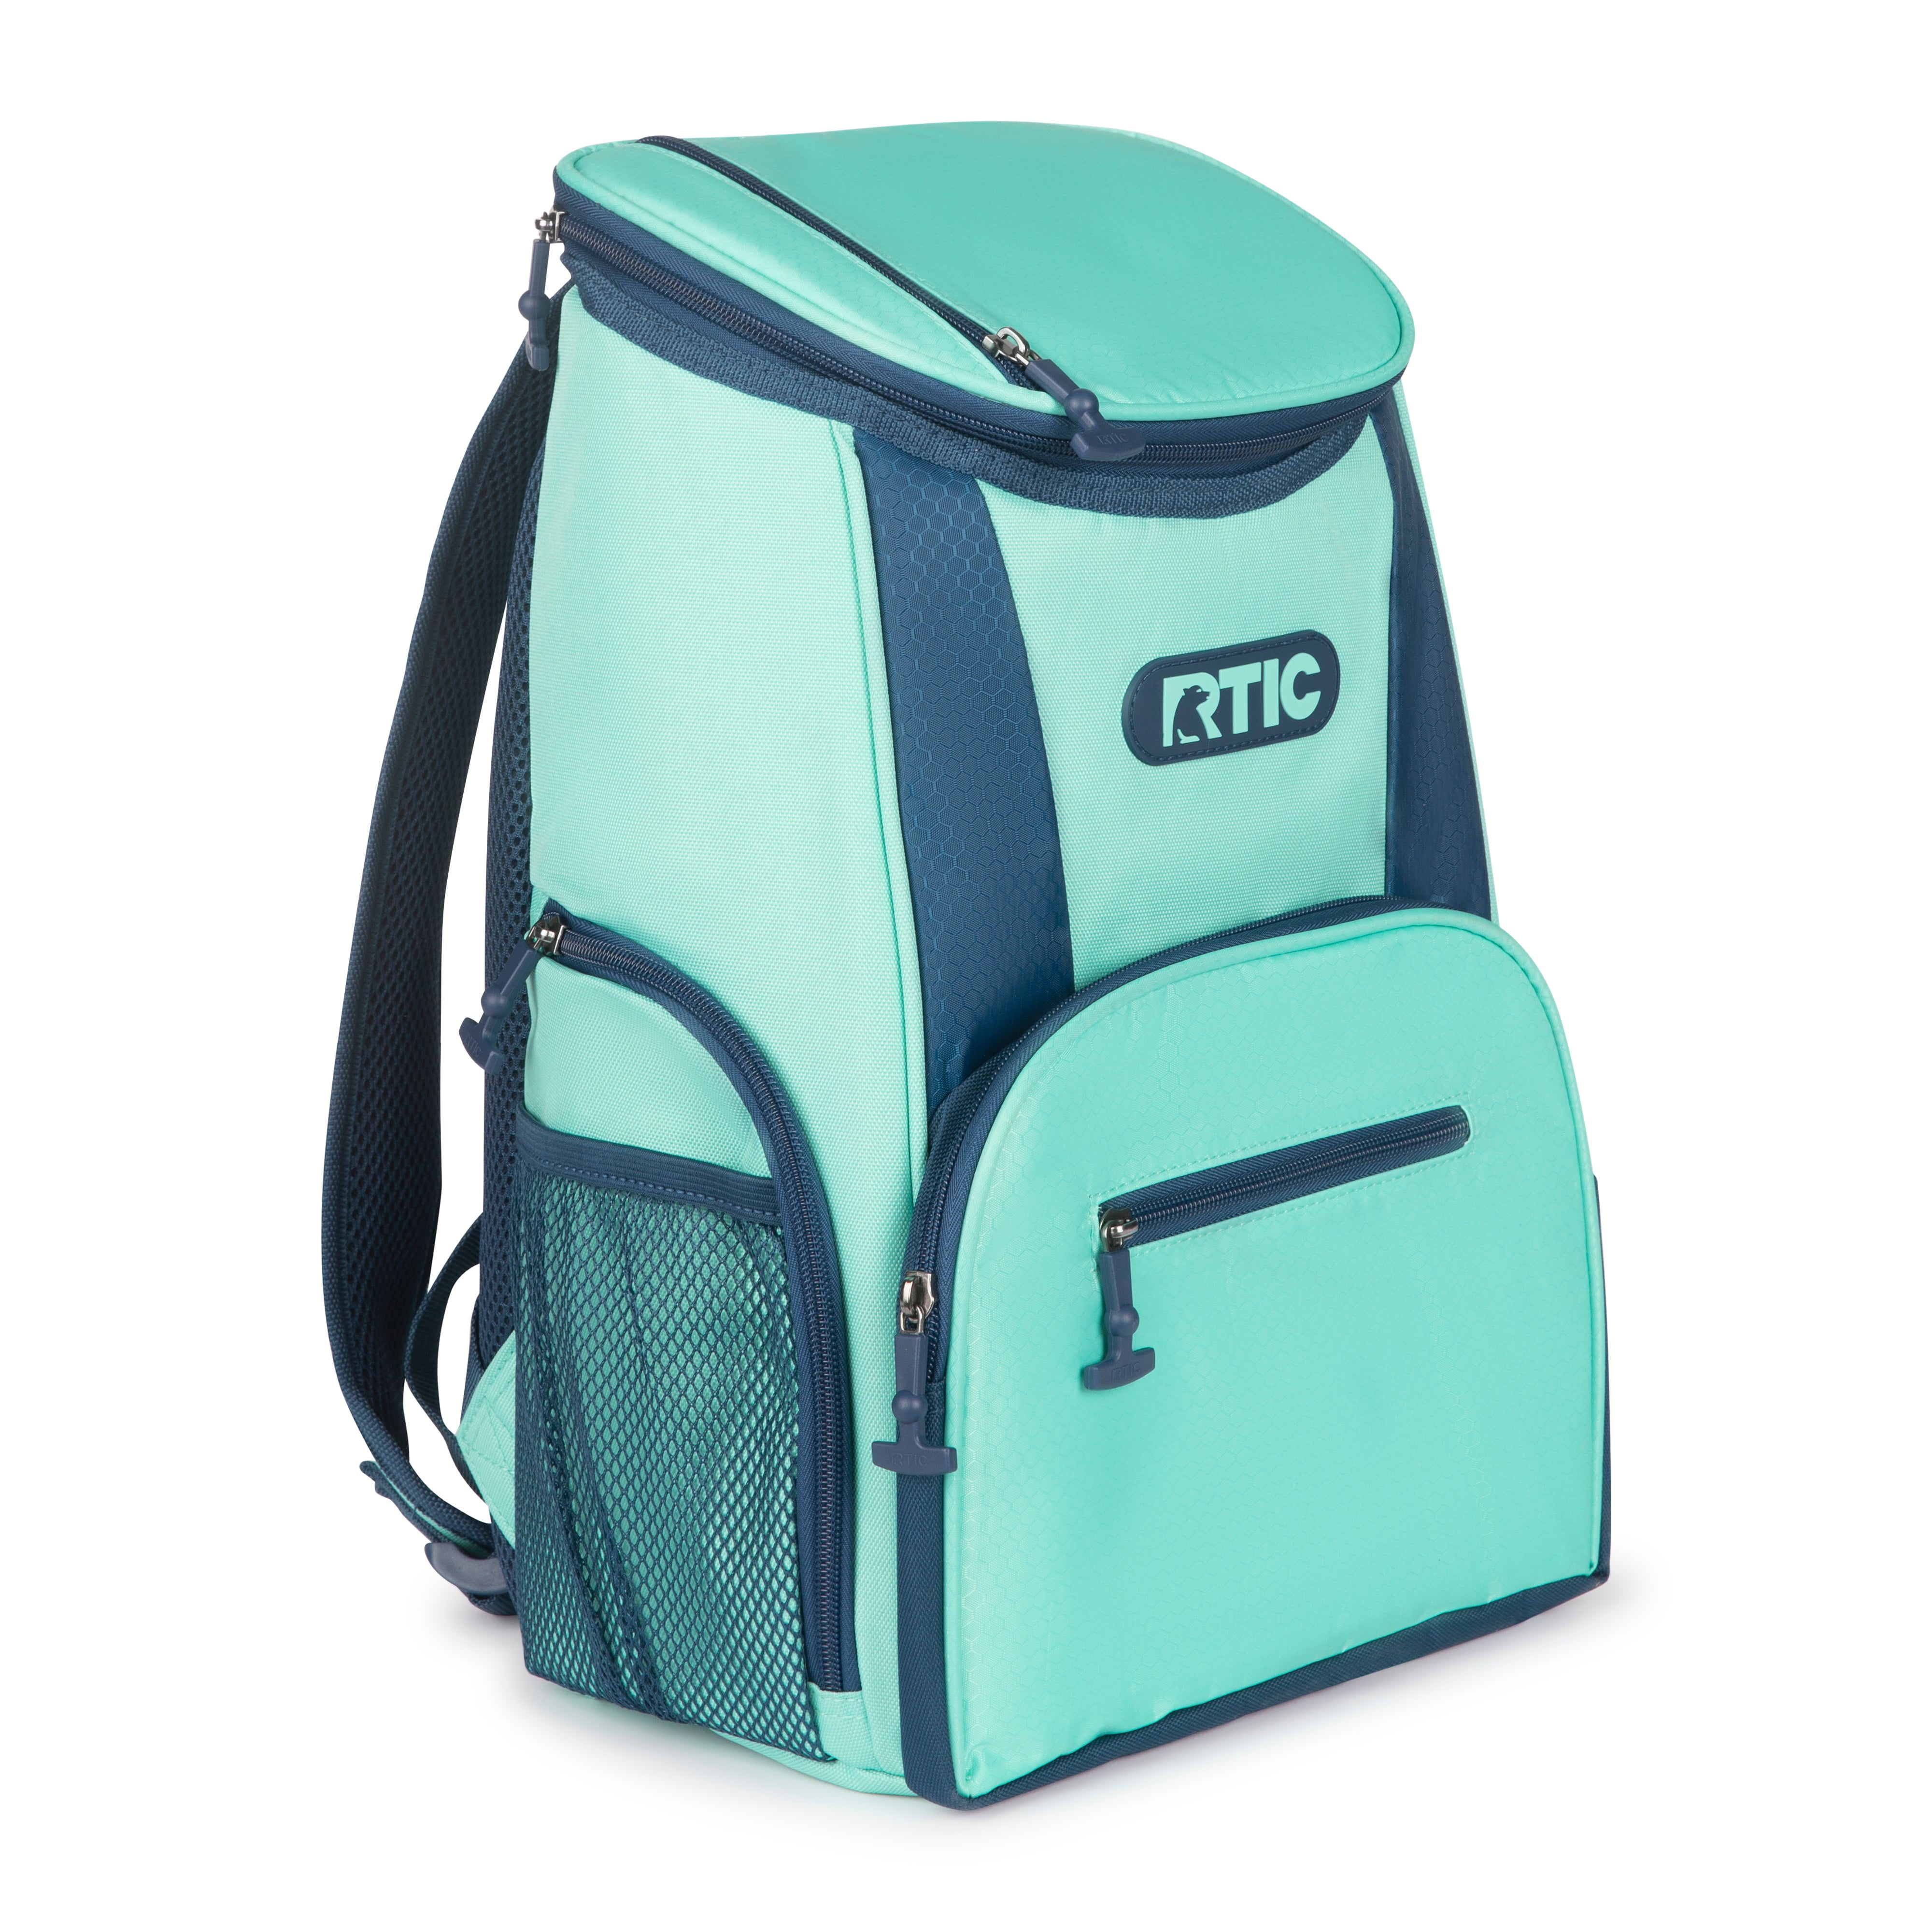 RTIC Lightweight Backpack Cooler Insulated Portable Soft Cooler